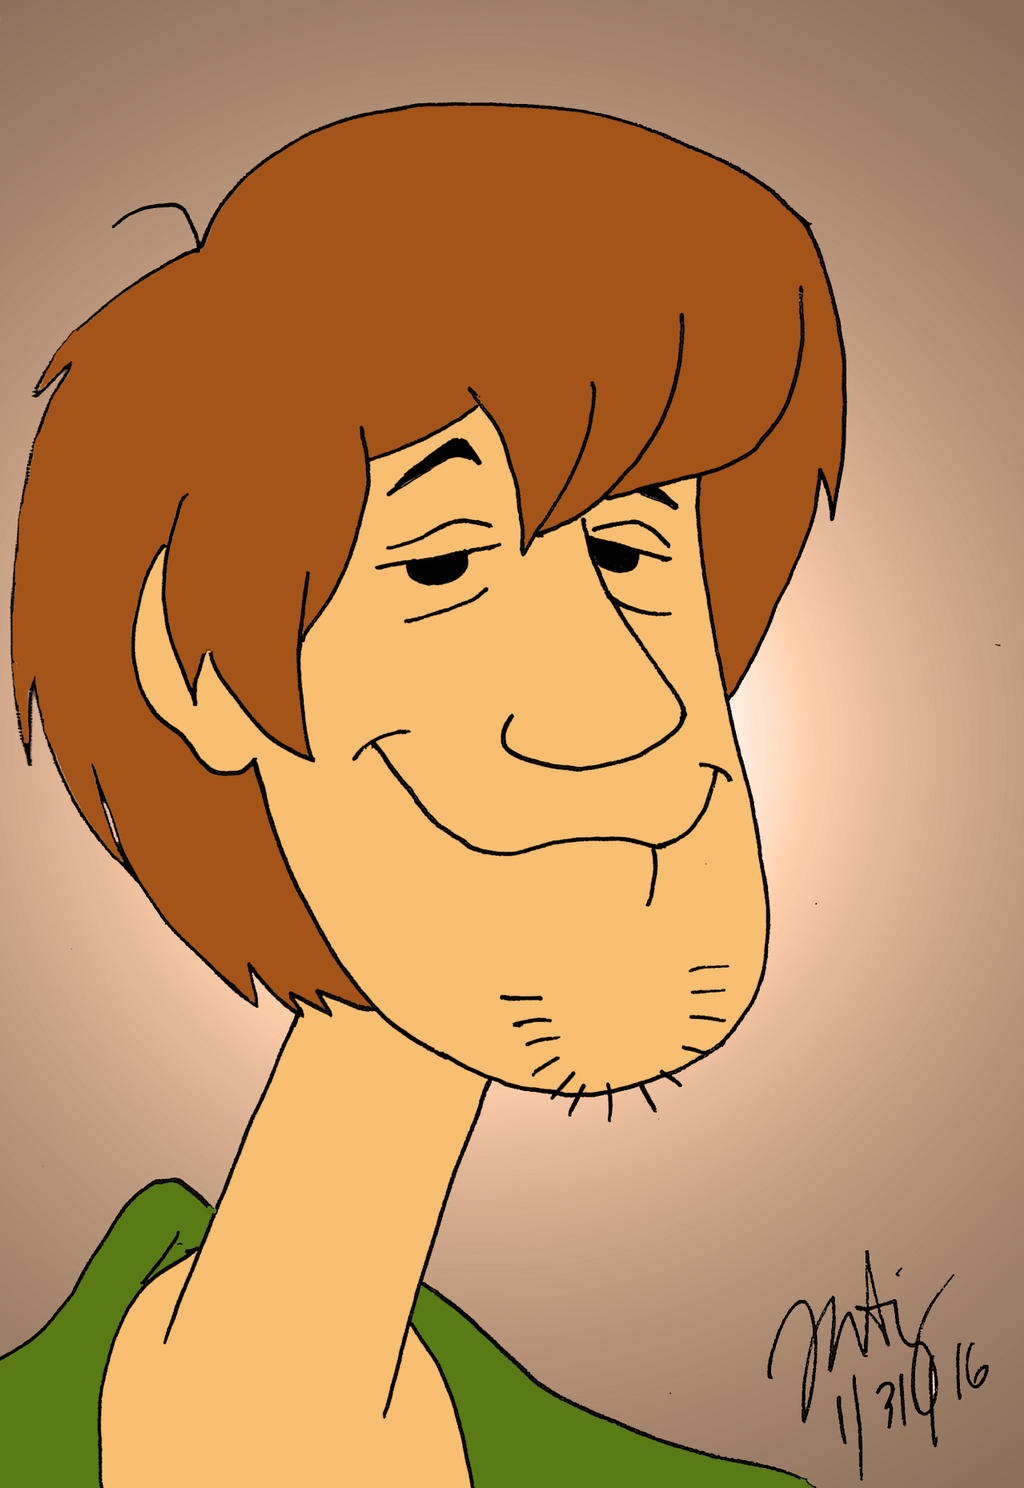 Shaggy Looking Cool (colored)